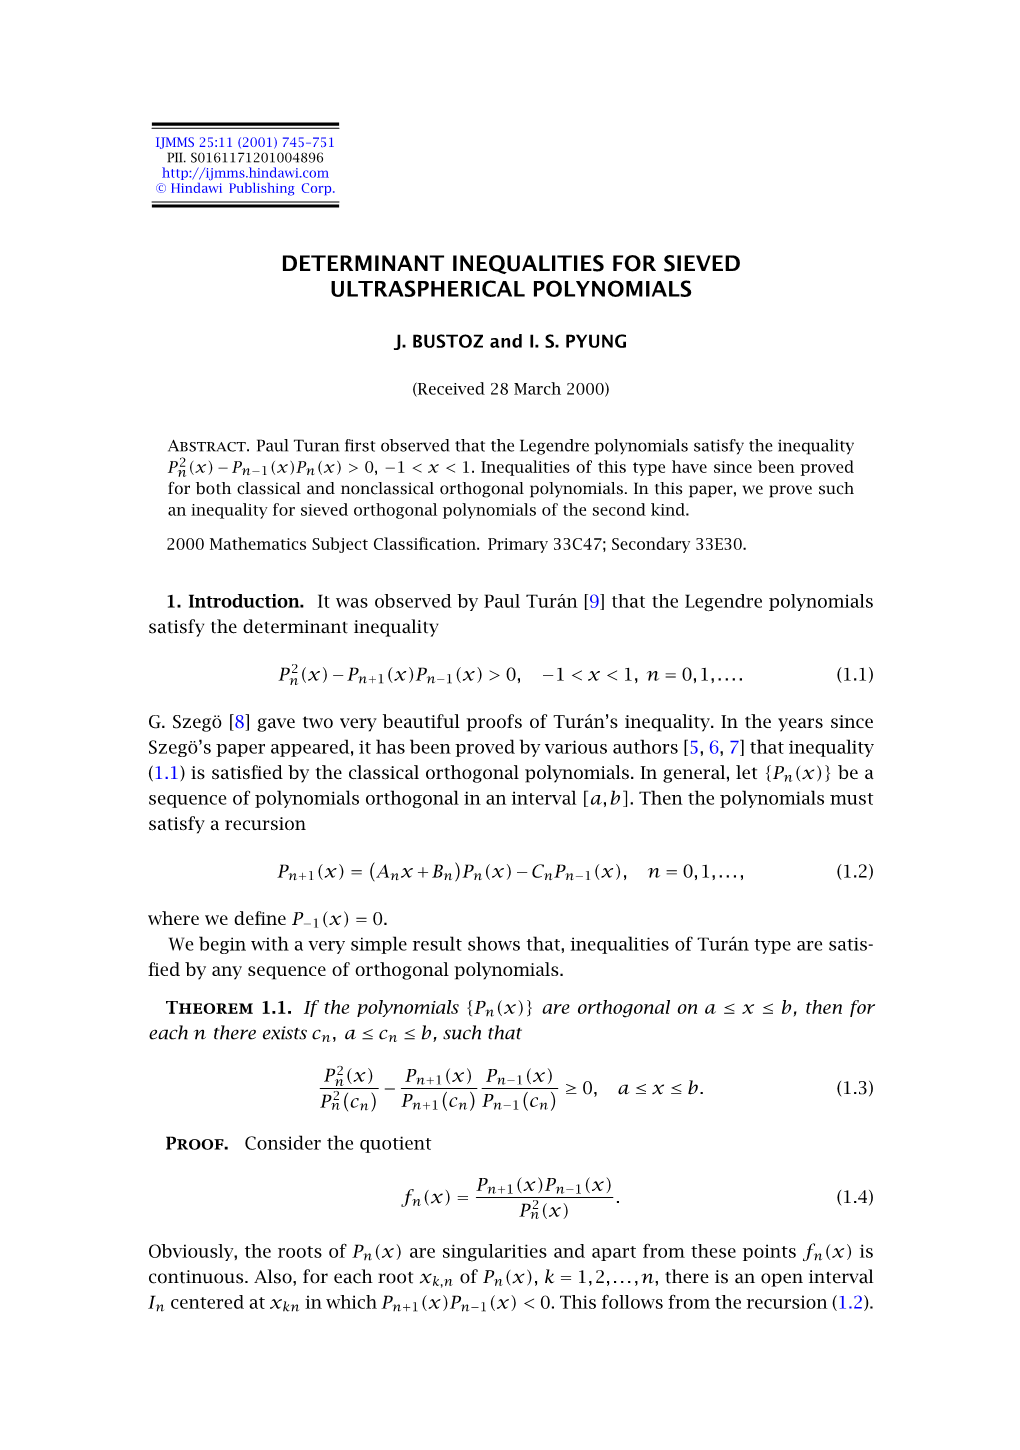 Determinant Inequalities for Sieved Ultraspherical Polynomials